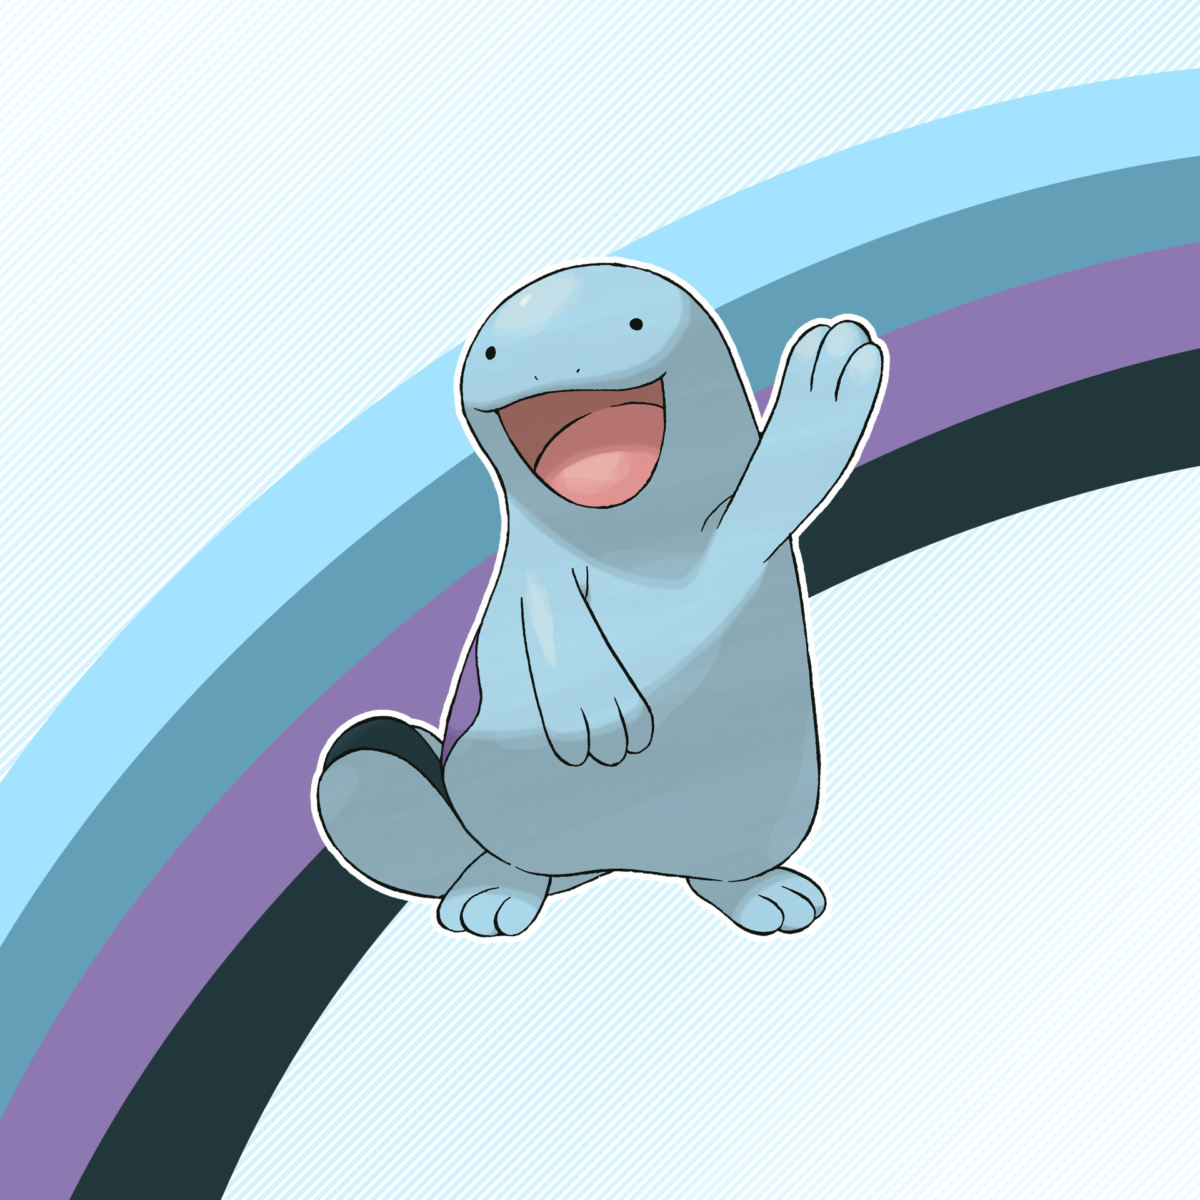 Made a few simple Pokemon wallpapers for Android. Open to requests …